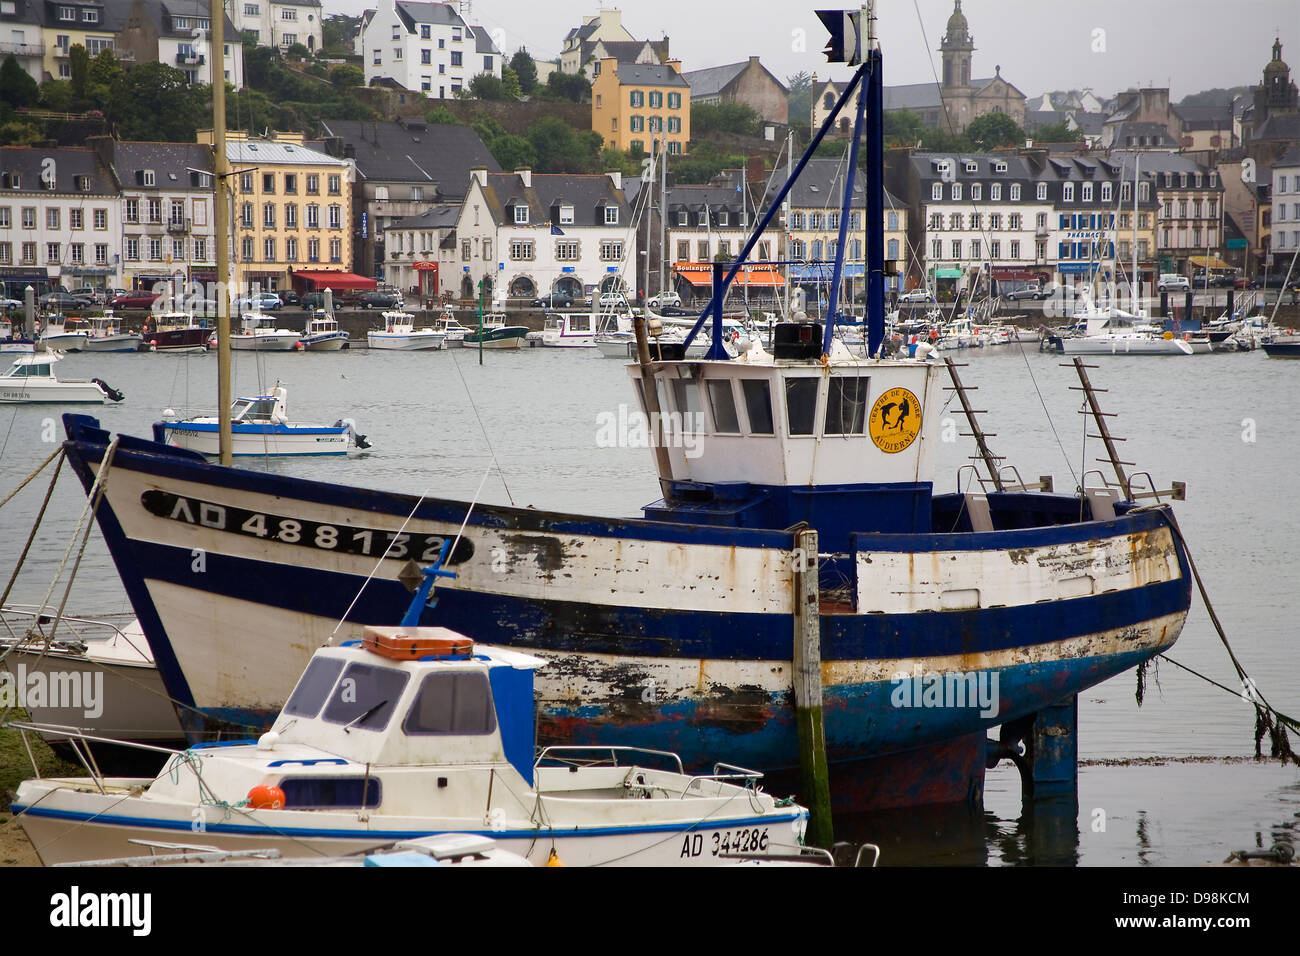 Port , boat and houses. Audierne (Breton: Gwaien), Finistère department, Brittany, northwestern France, Europe. Stock Photo